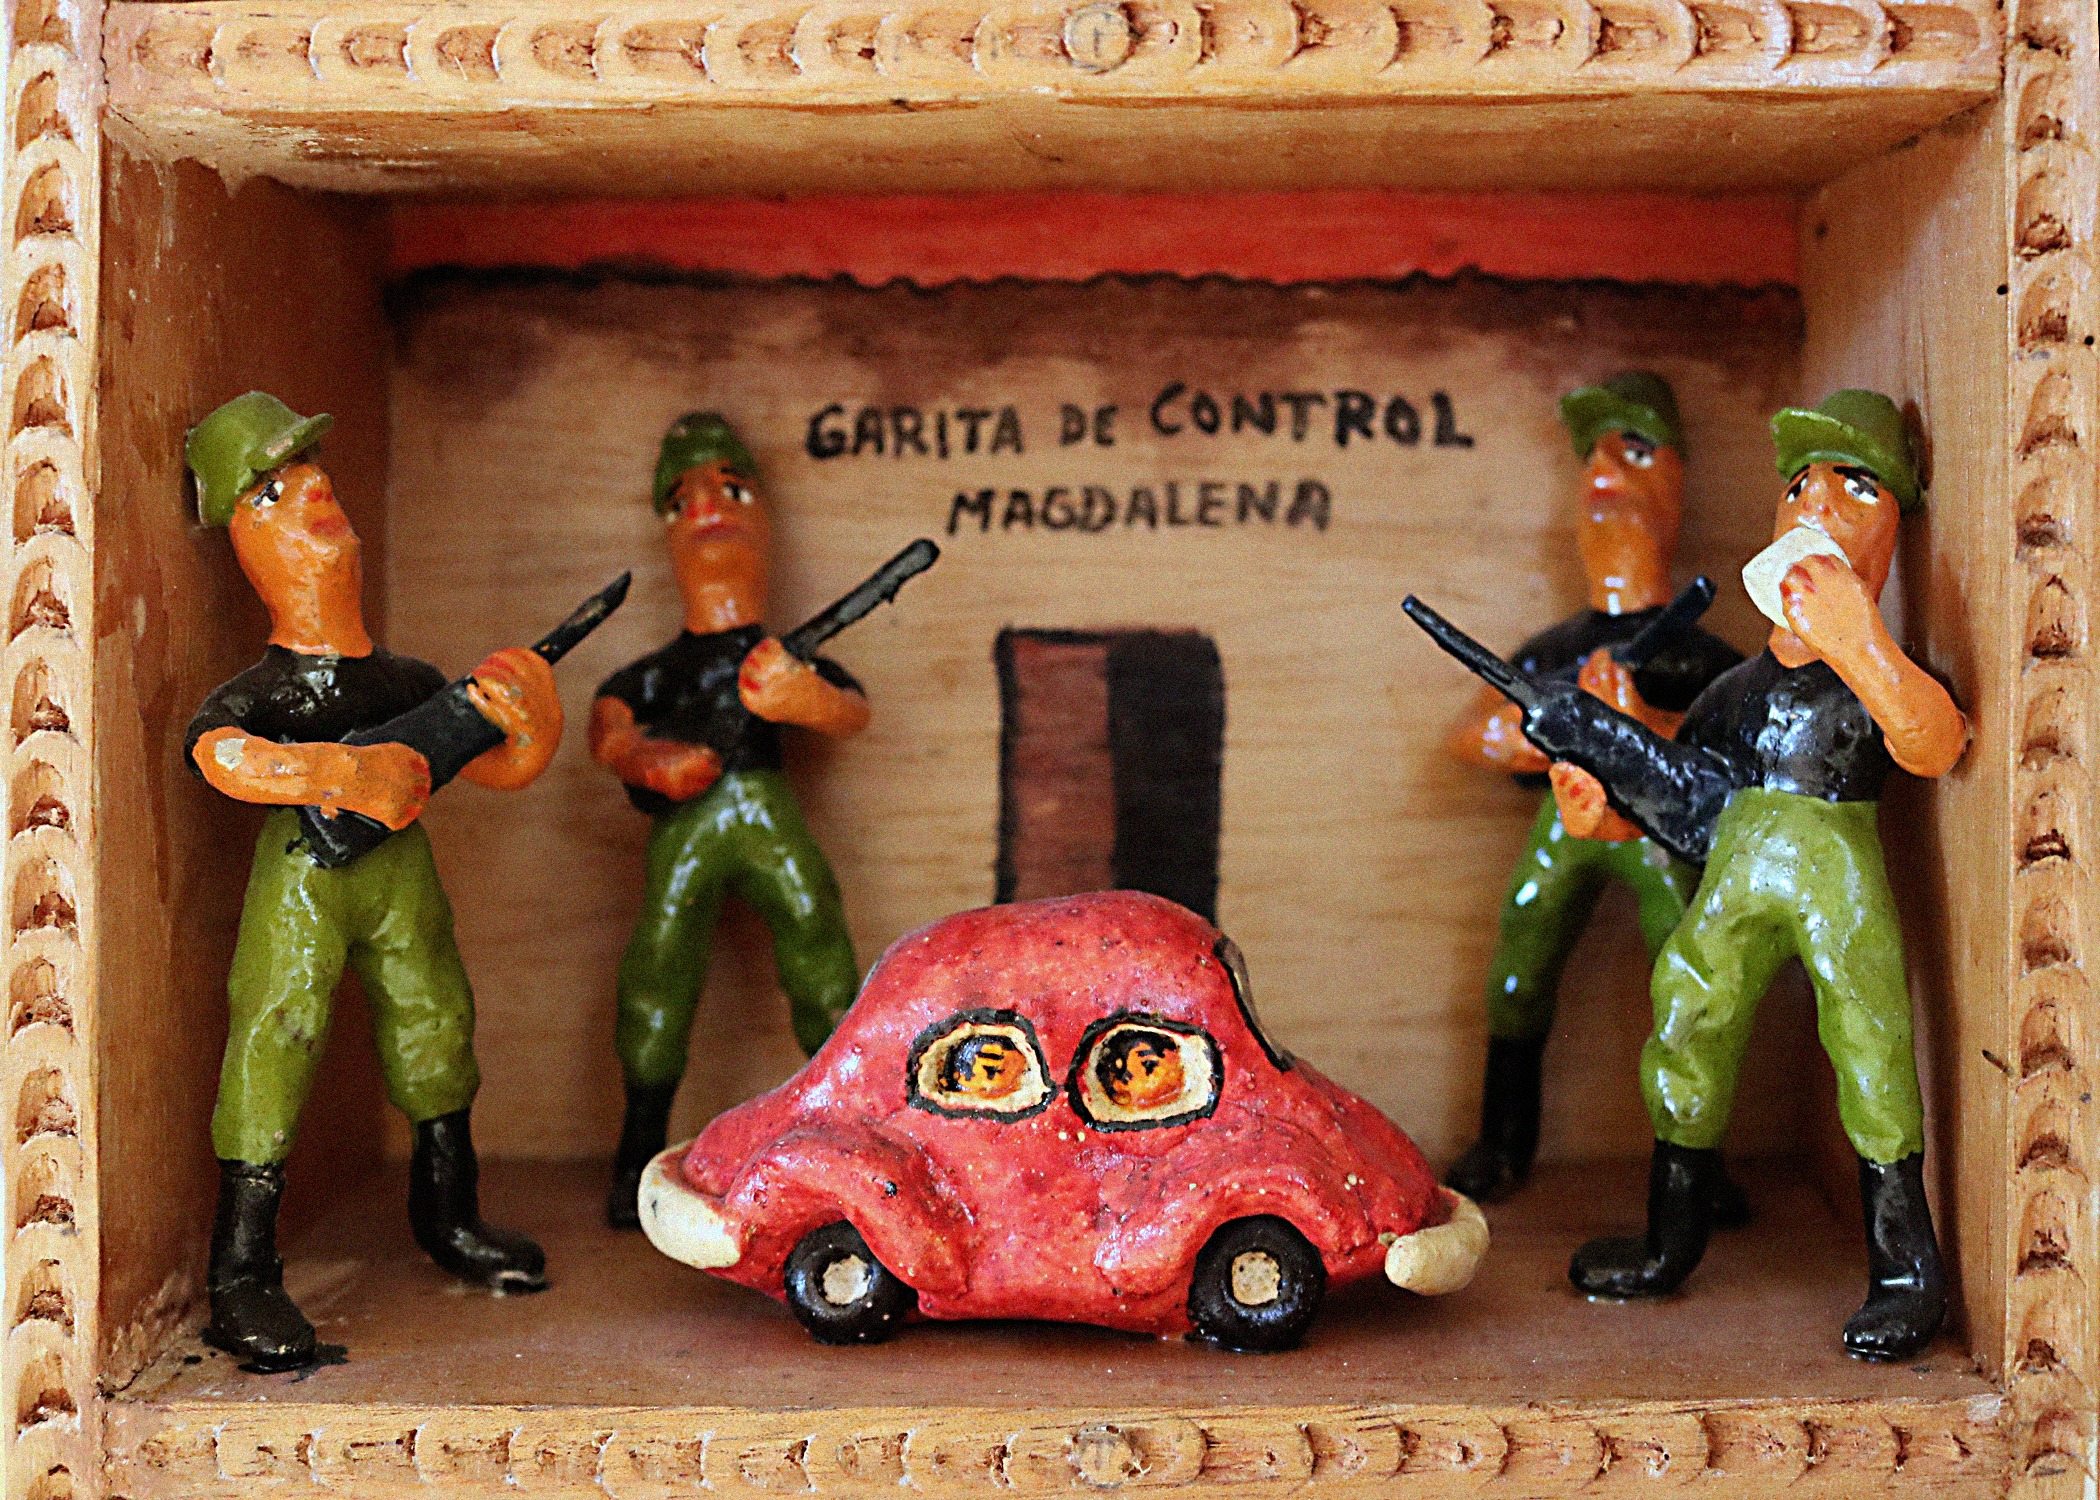 A scene called Magdalena Control Point within a retablo. The scene portray four large figurines dressed in military-like uniforms and holding guns, towering over a red car. In the car windows can be seen faces of passengers. The back wall has text that reads, "Garita de Control Magdalena."